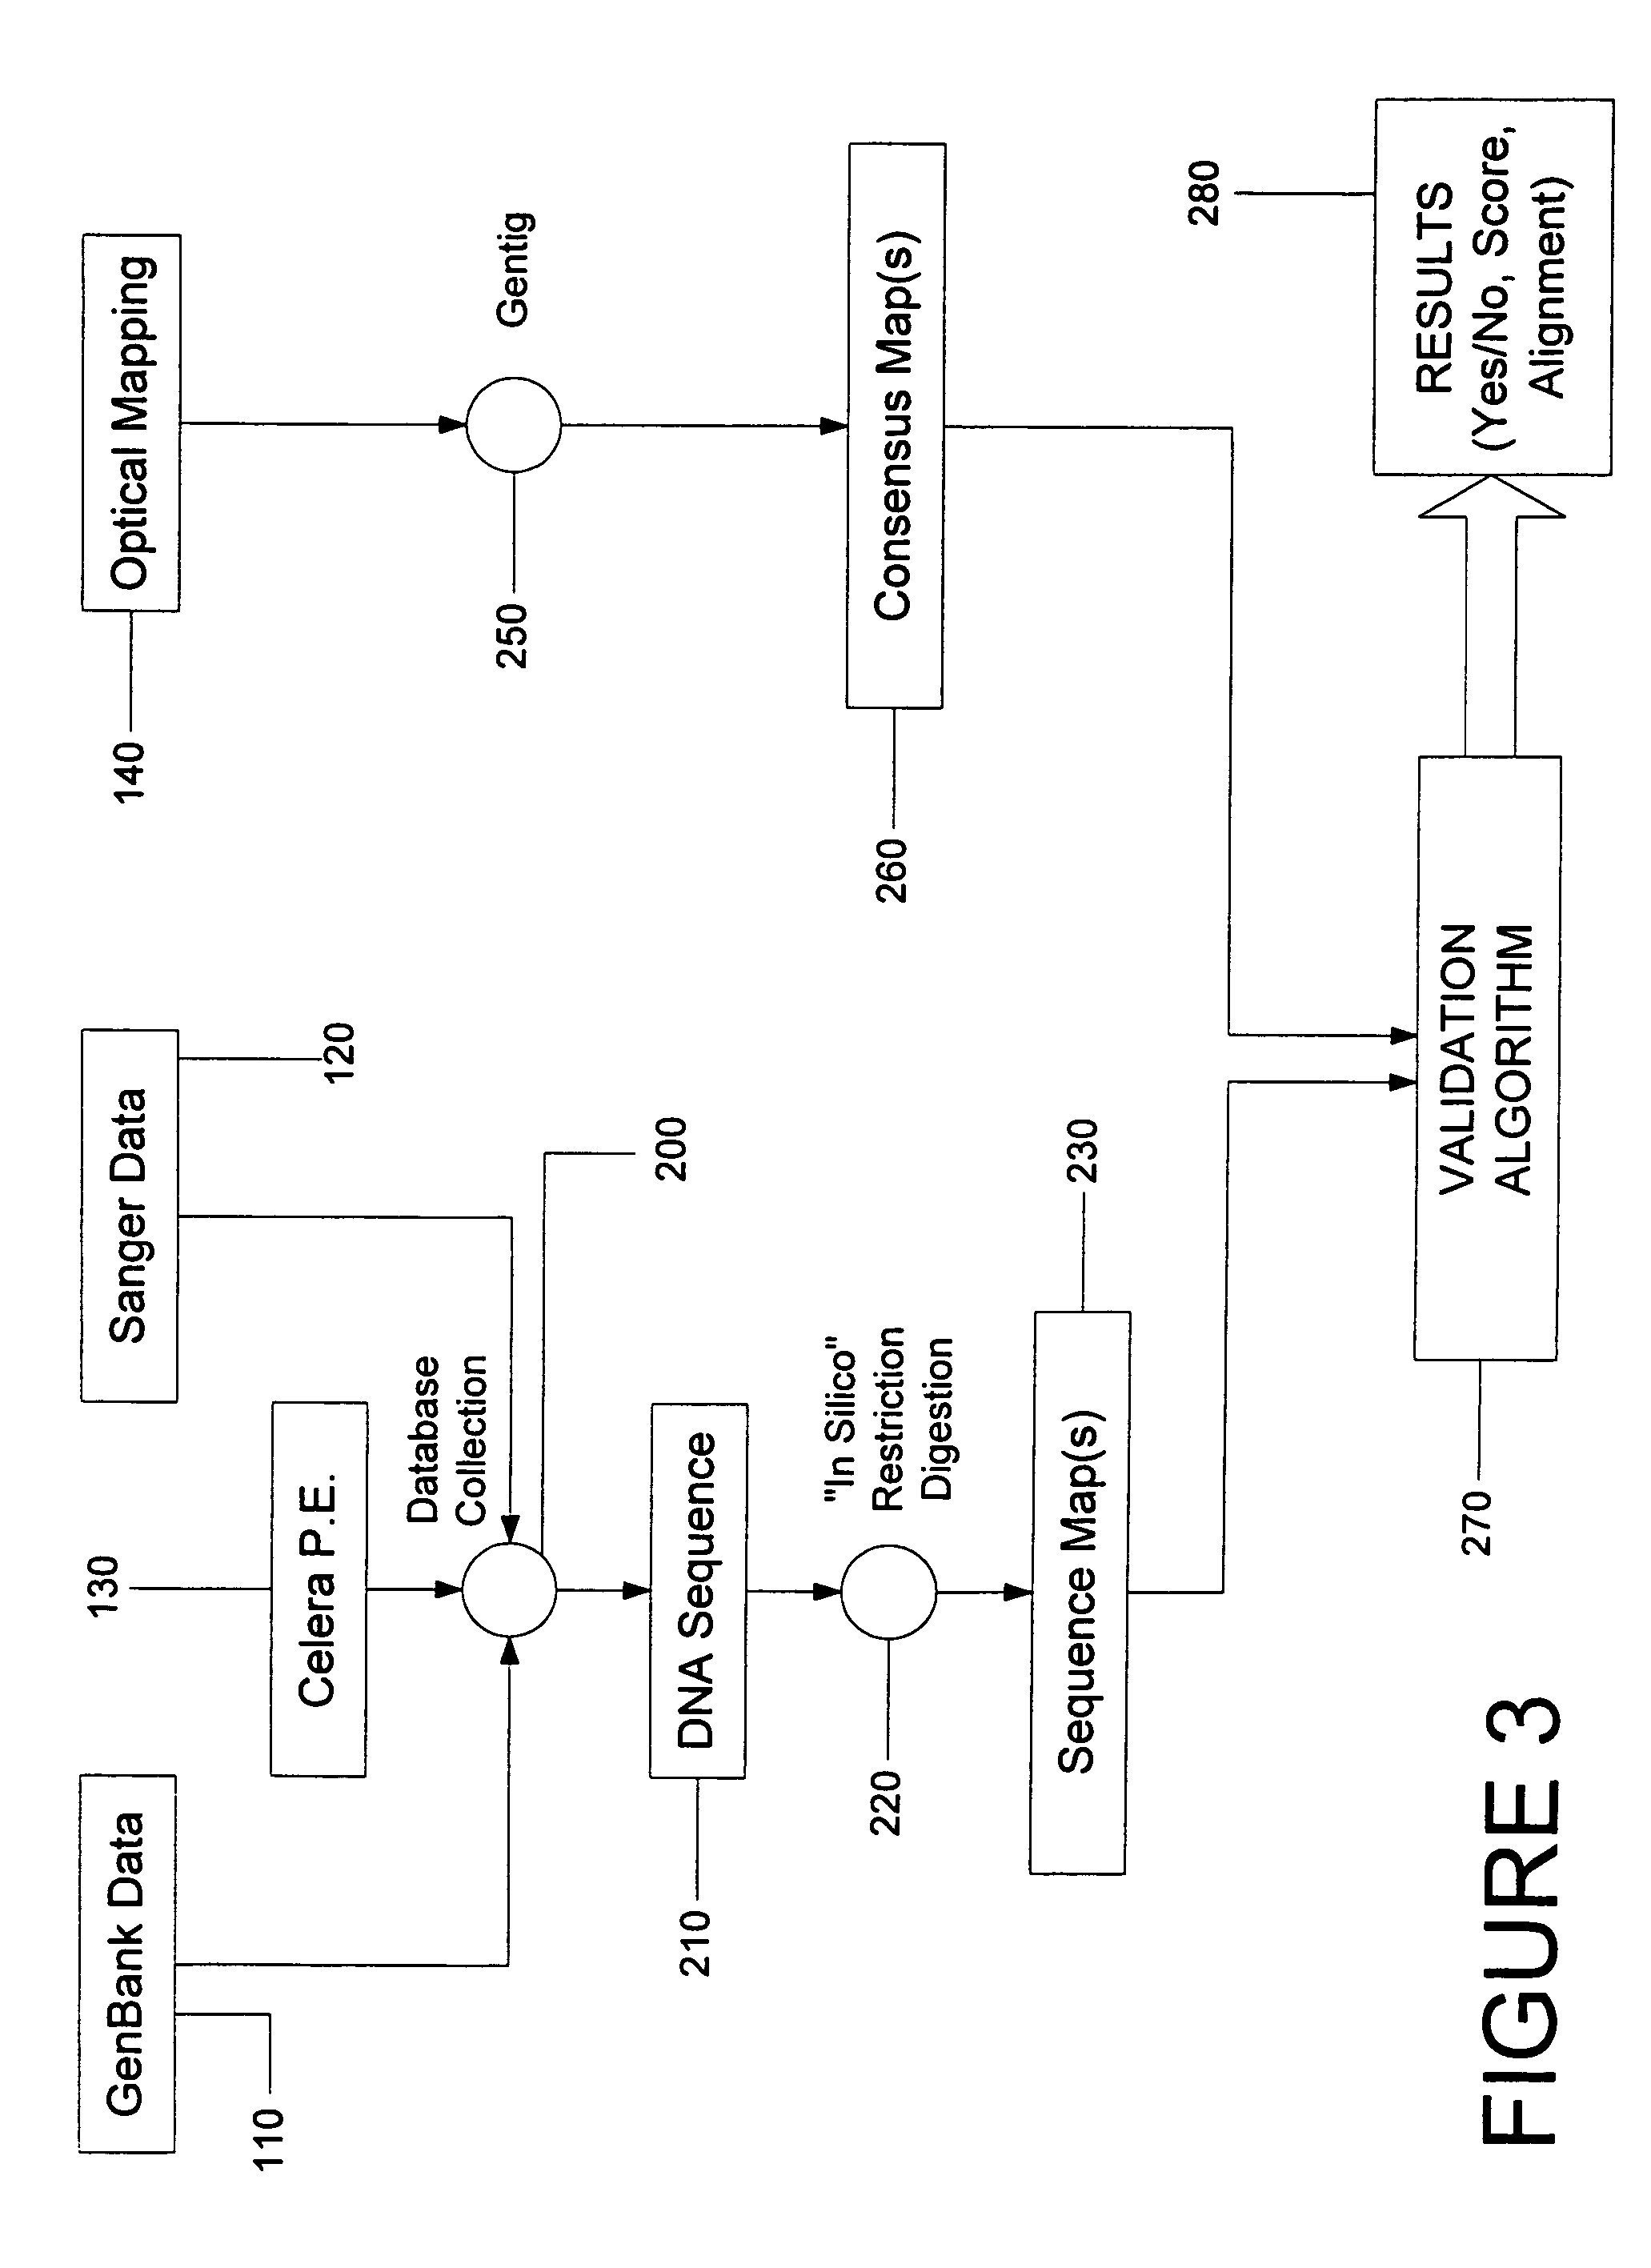 System and process for validating, aligning and reordering one or more genetic sequence maps using at least one ordered restriction map